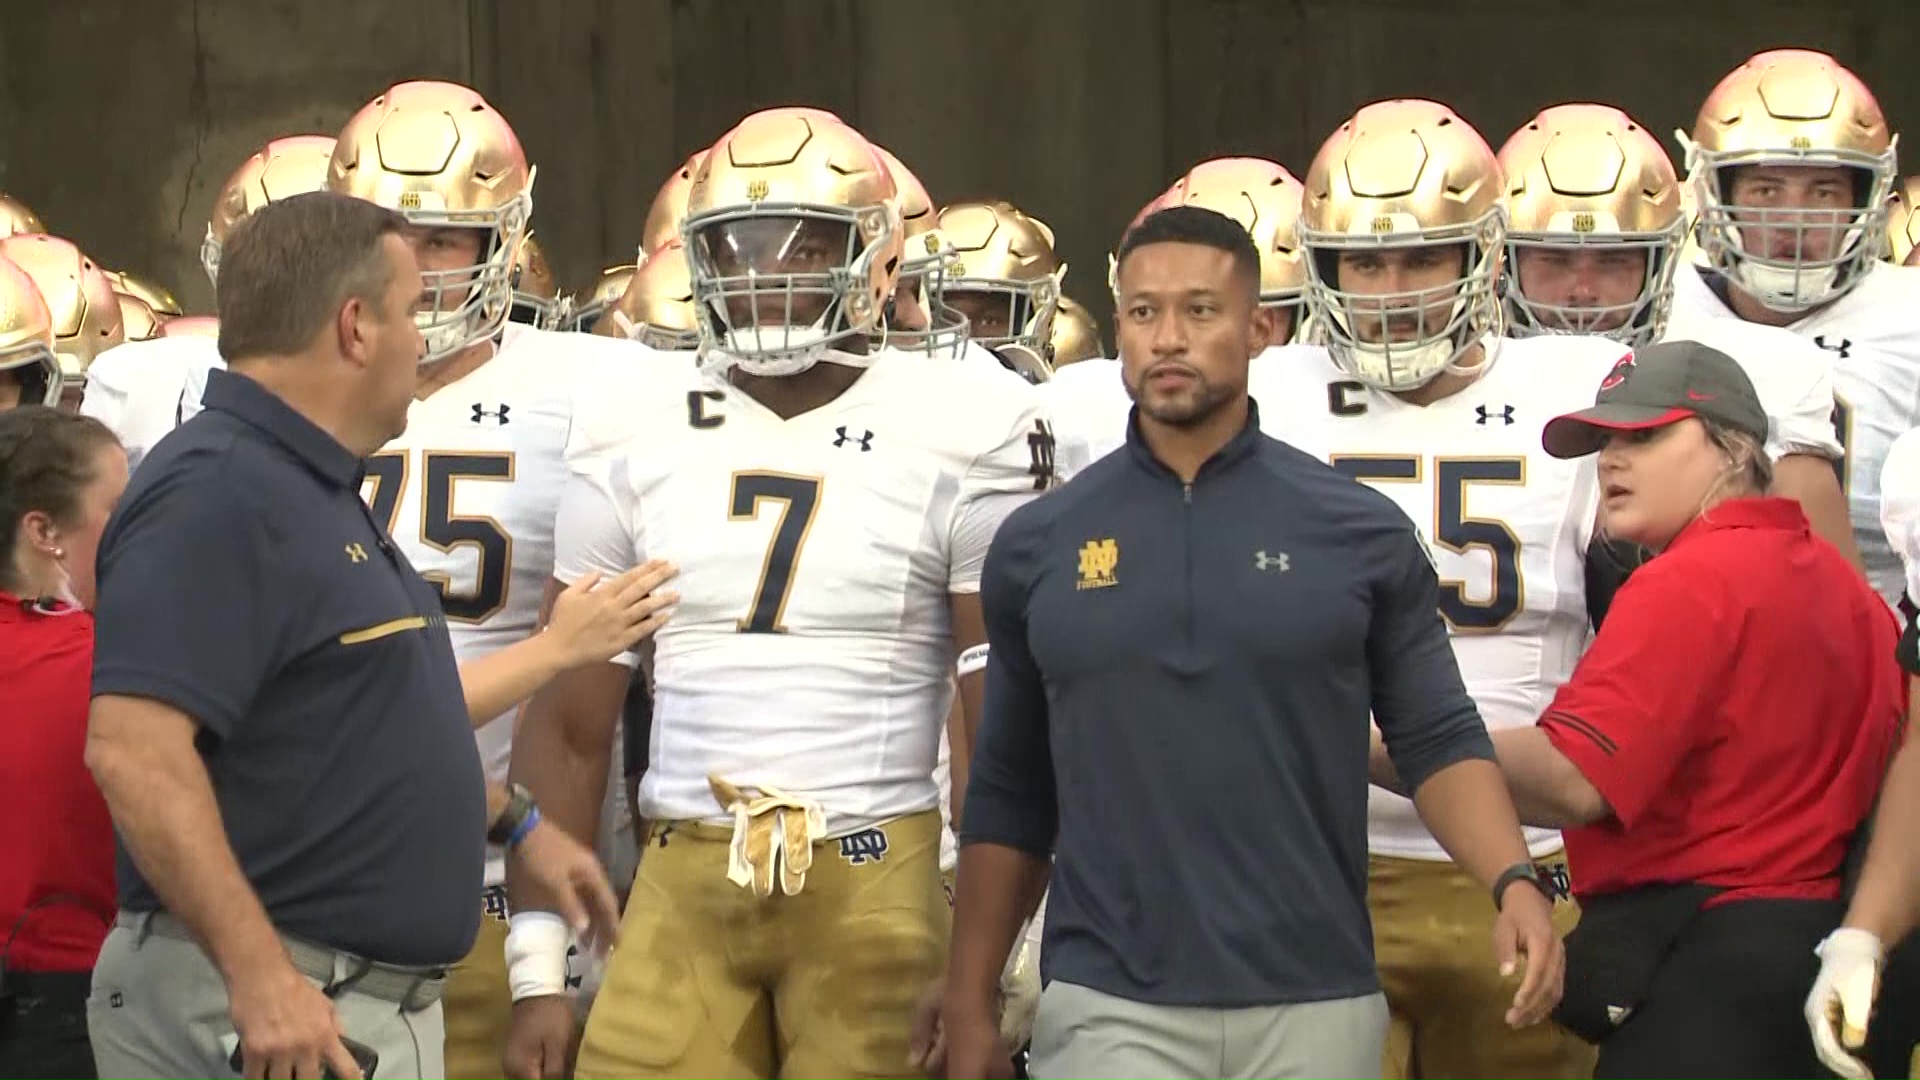 Notre Dame Signs Reported $100 Million Under Armour Extension